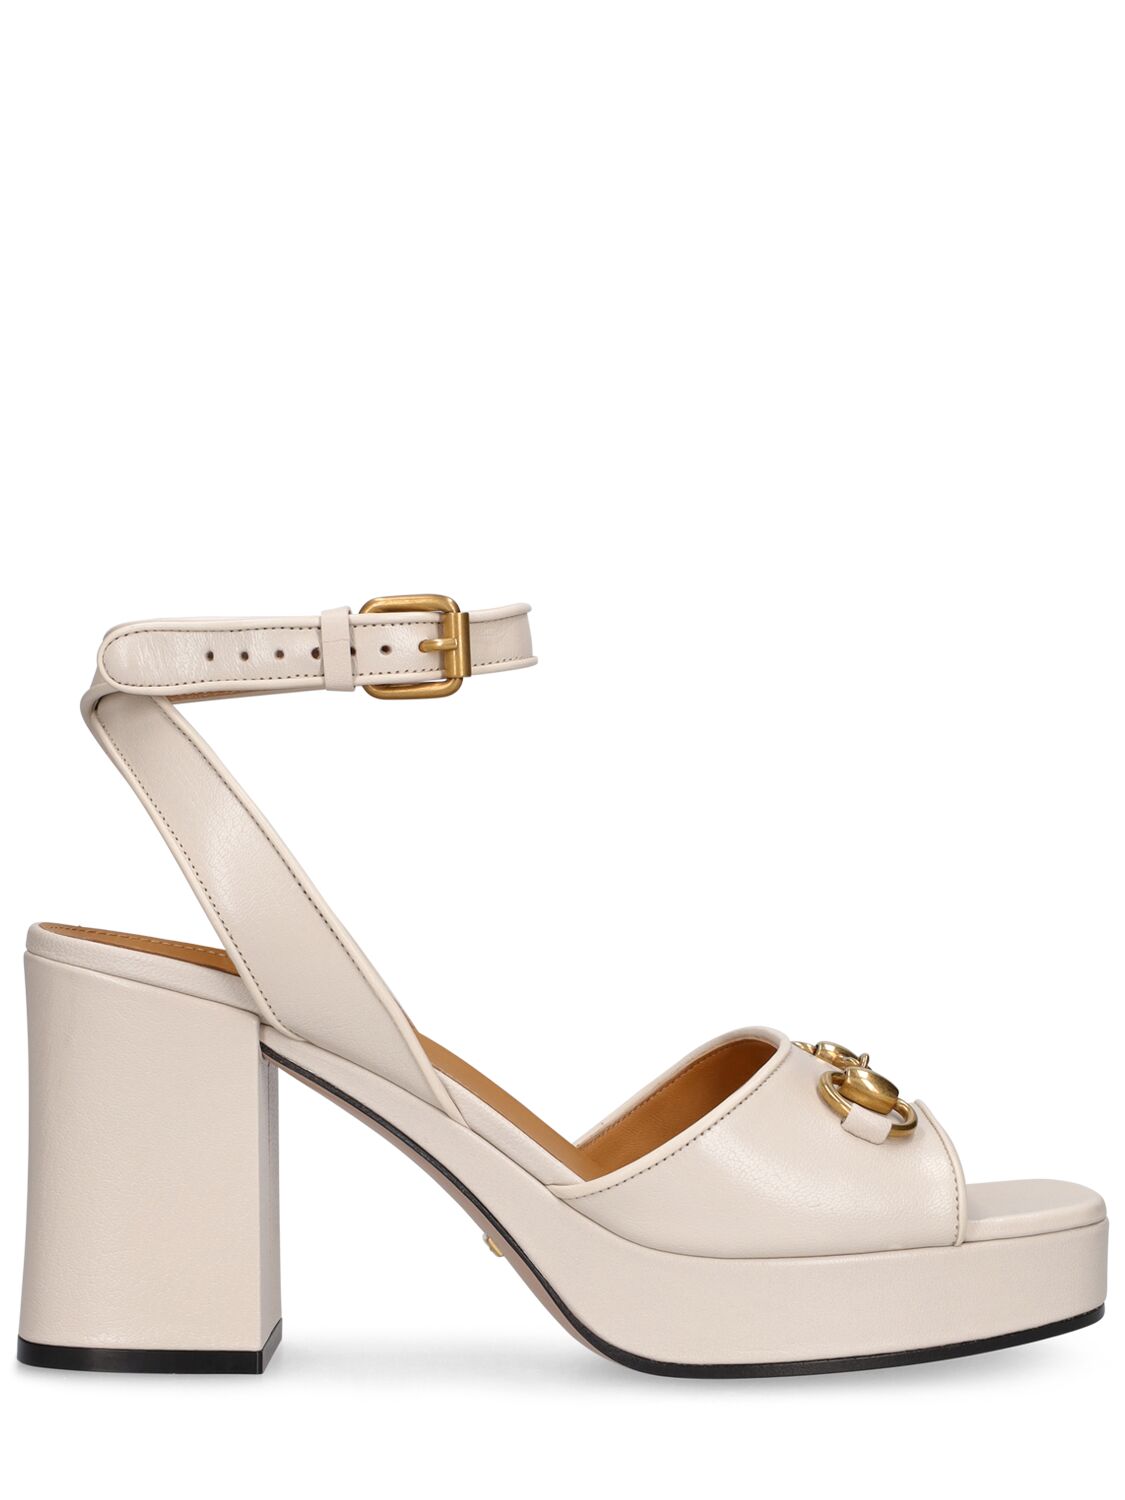 Gucci 60mm Lady Horsebit Leather Sandals In Mystic White